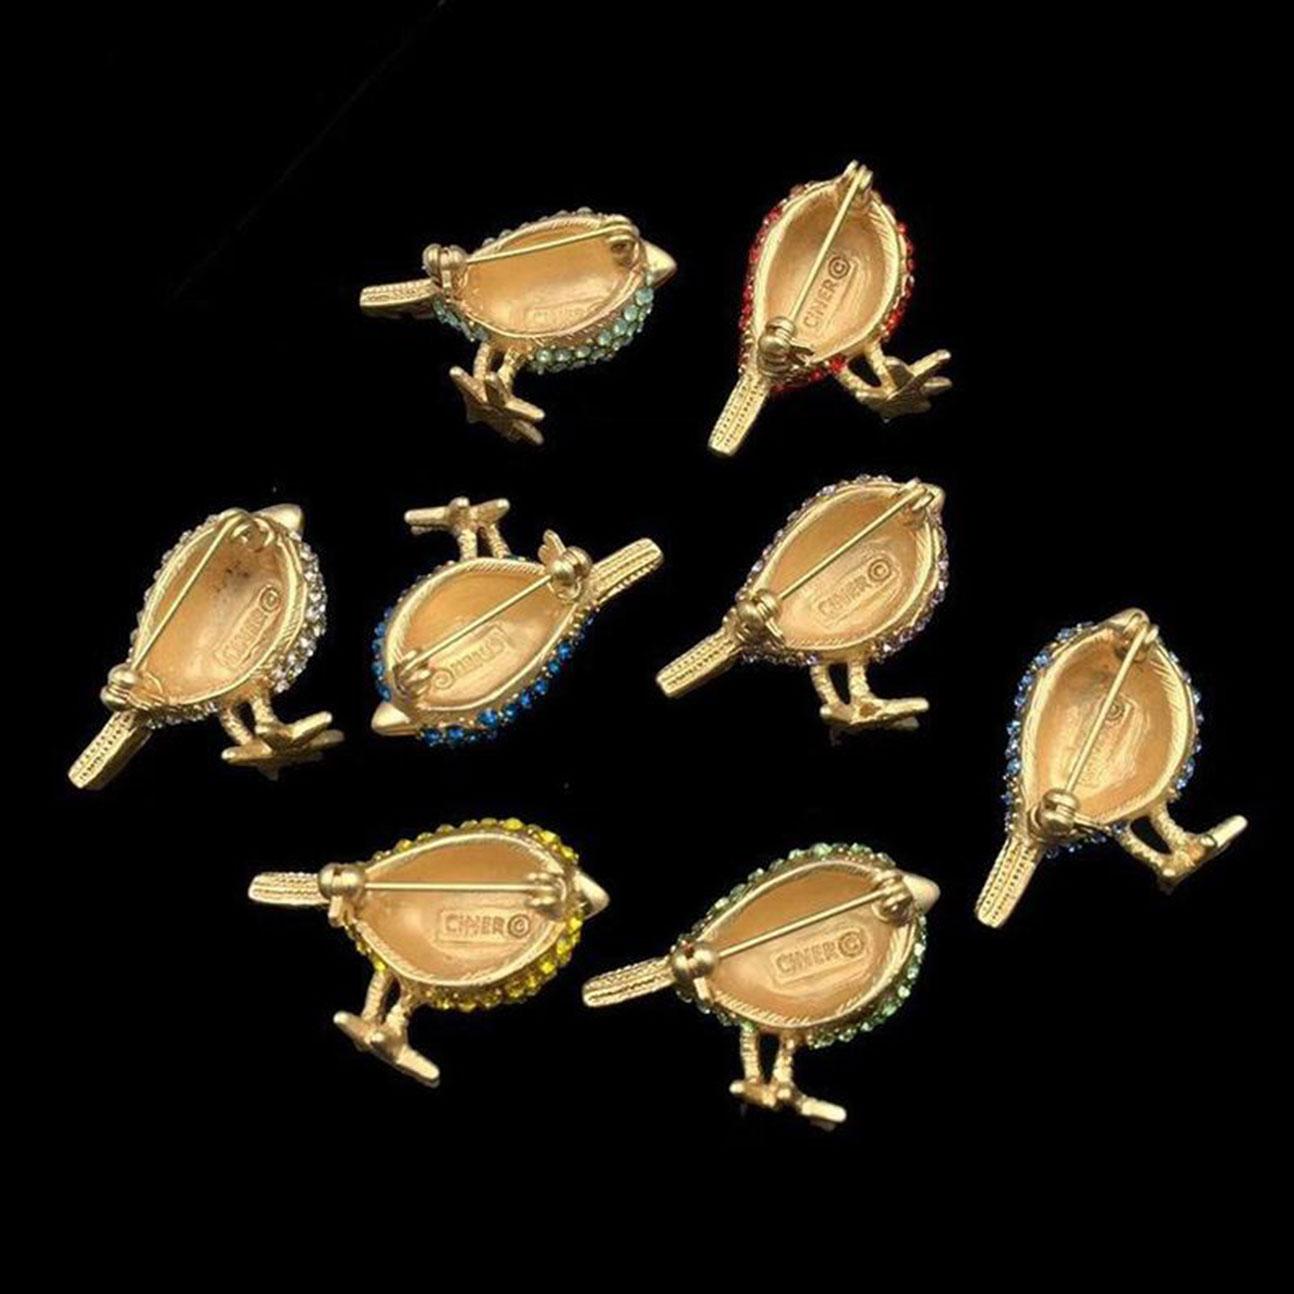 A Charming collection of eight CINER Chickadee Bird Pins, crafted in yellow Gold plate and set with assorted Faux colored Gem Stones in different colors; Each Birdie is Signed CINER;  measuring approx. 1.50